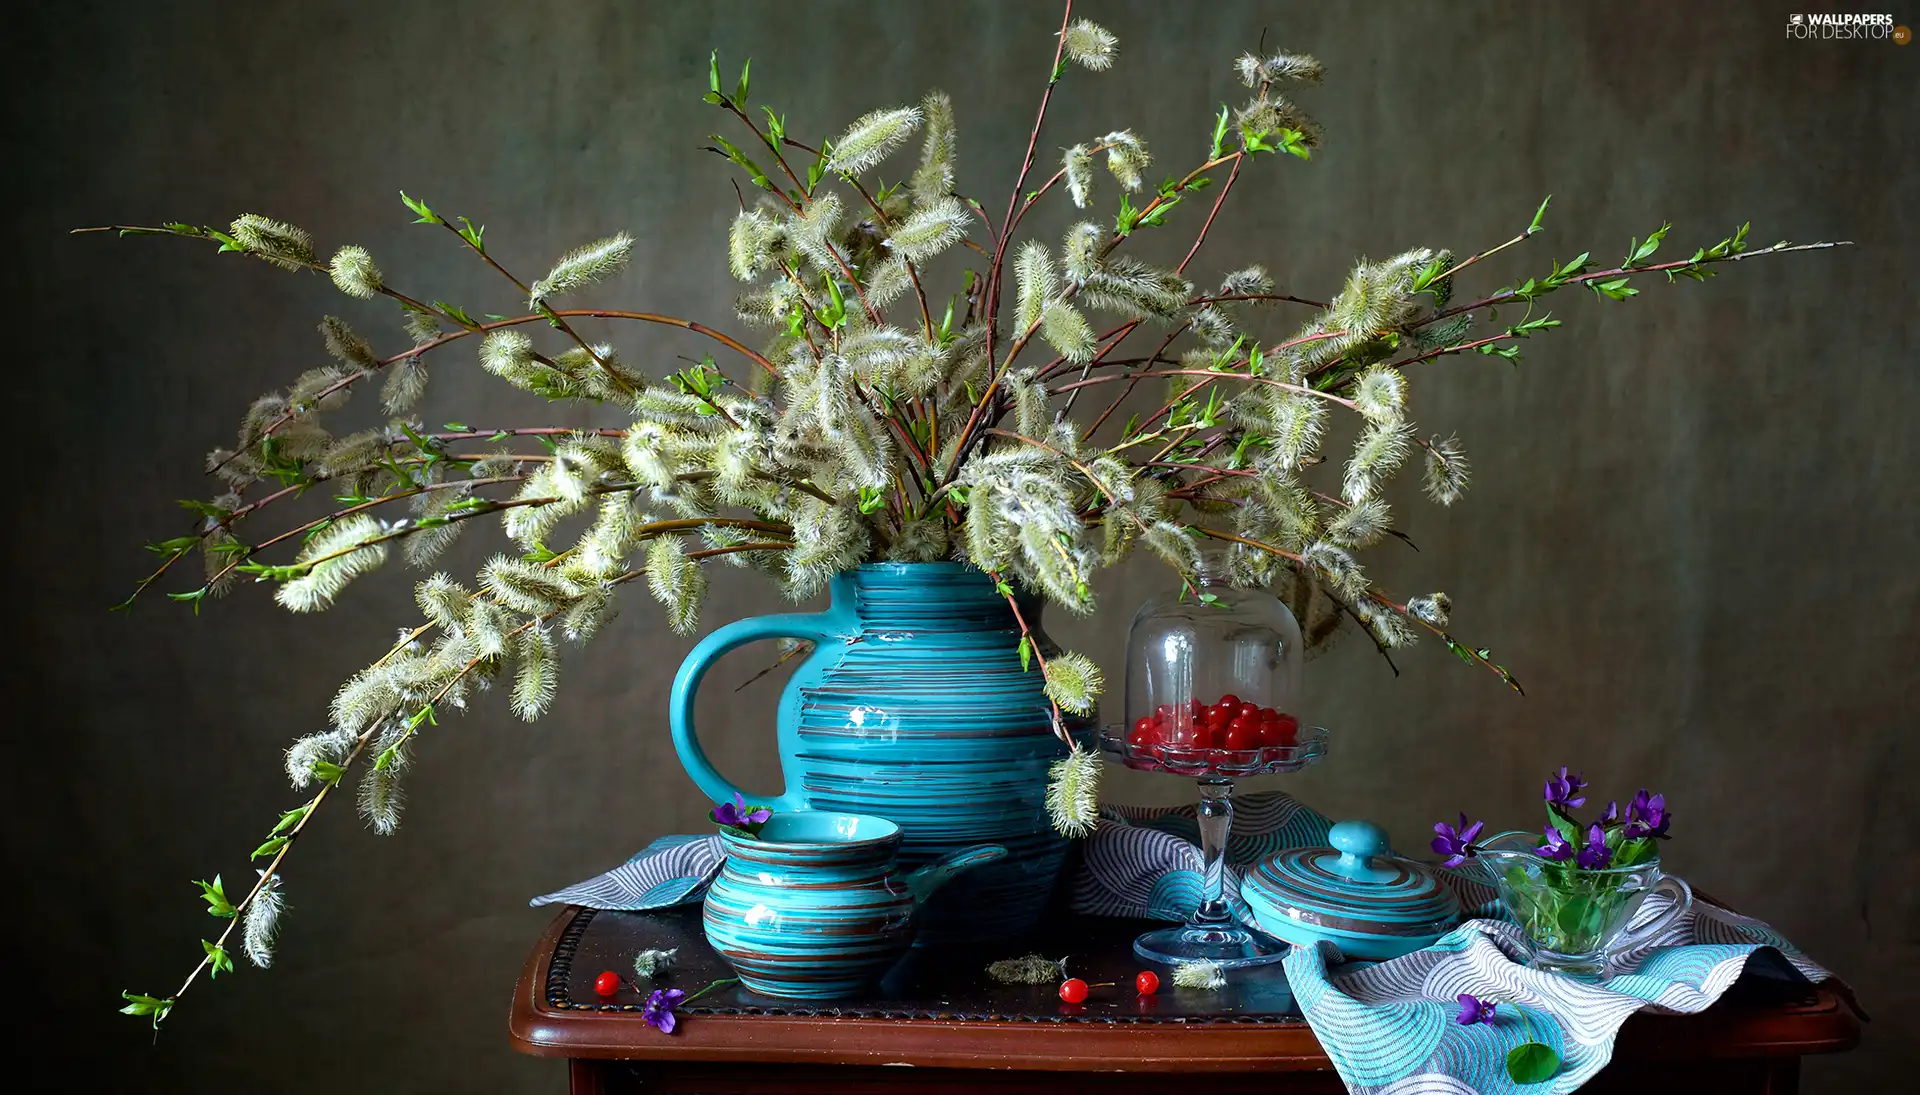 Willow, database, table, blue, Violets, Twigs, composition, jug